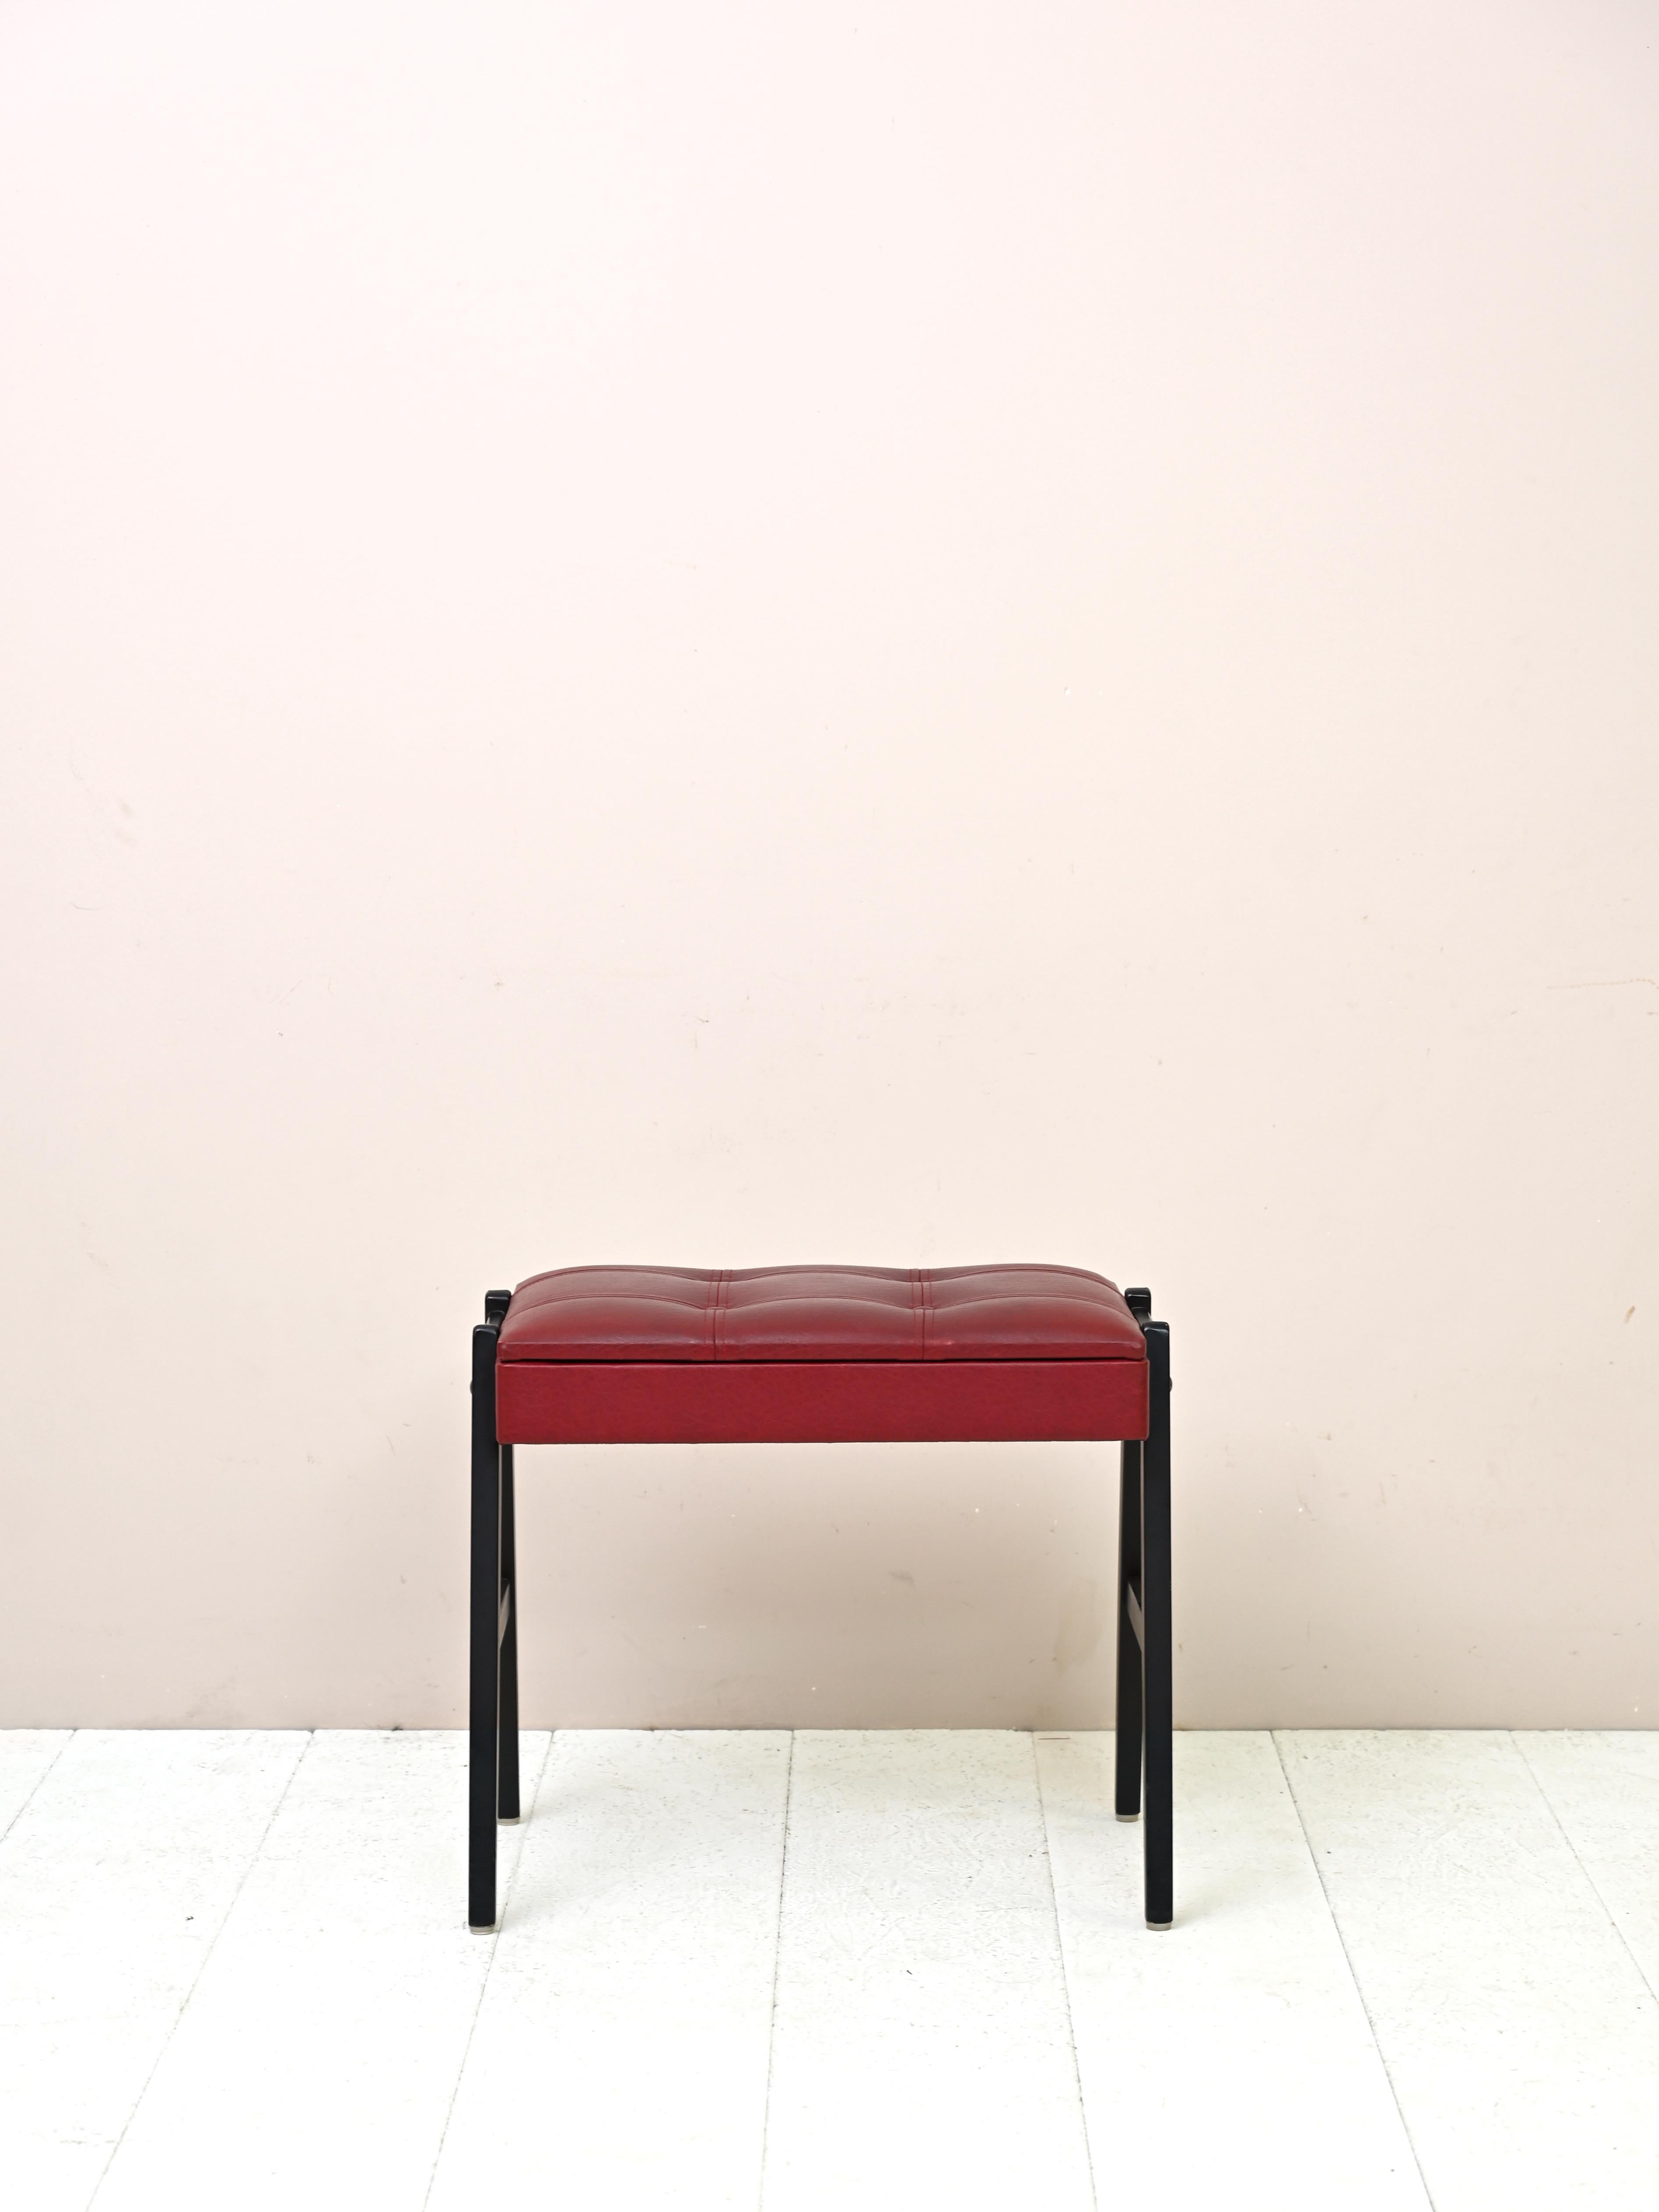 Scandinavian wood and leather stool
Practical original 1960s footstool with wooden frame and seat upholstered in leatherette
red. The wooden legs are painted black. A small storage compartment is located under the seat.

Good condition. It has